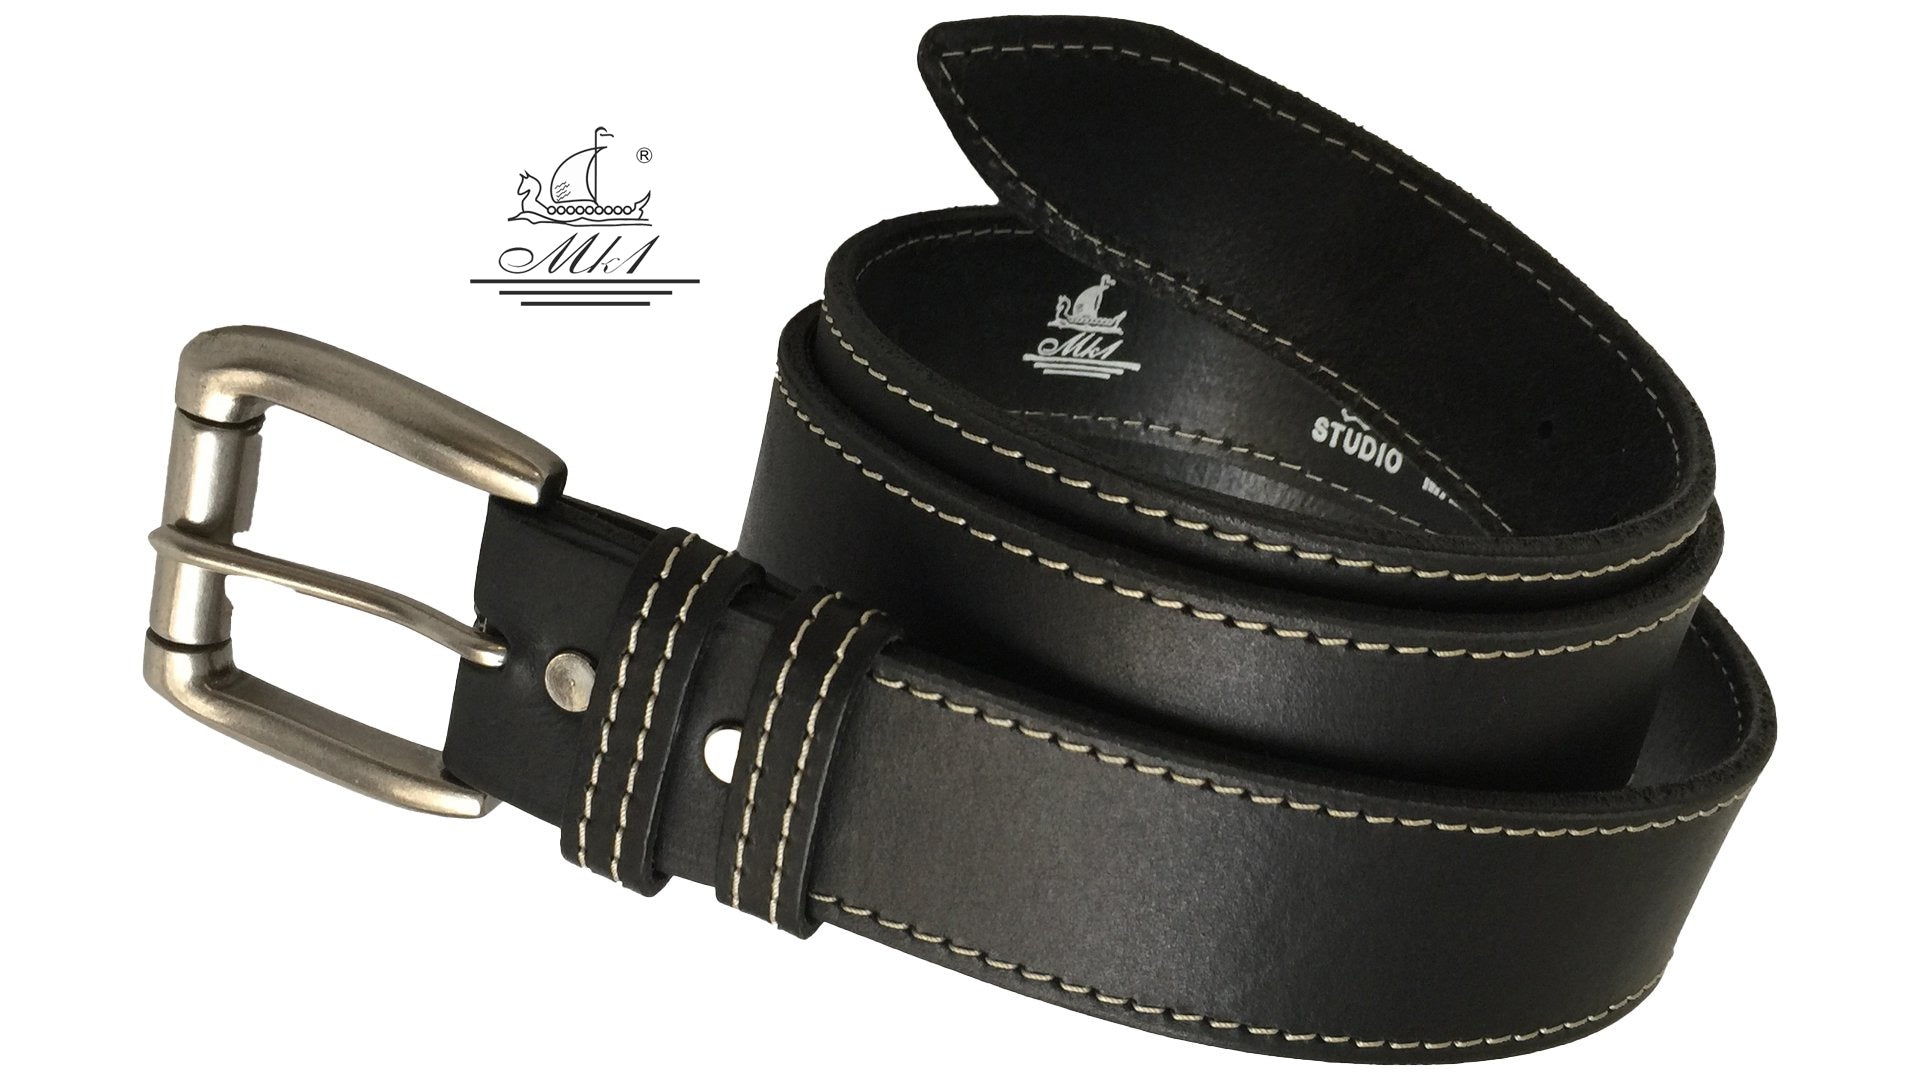 22/40m-ag Hand made  leather belt, 4 cm width, and  roll buckle.